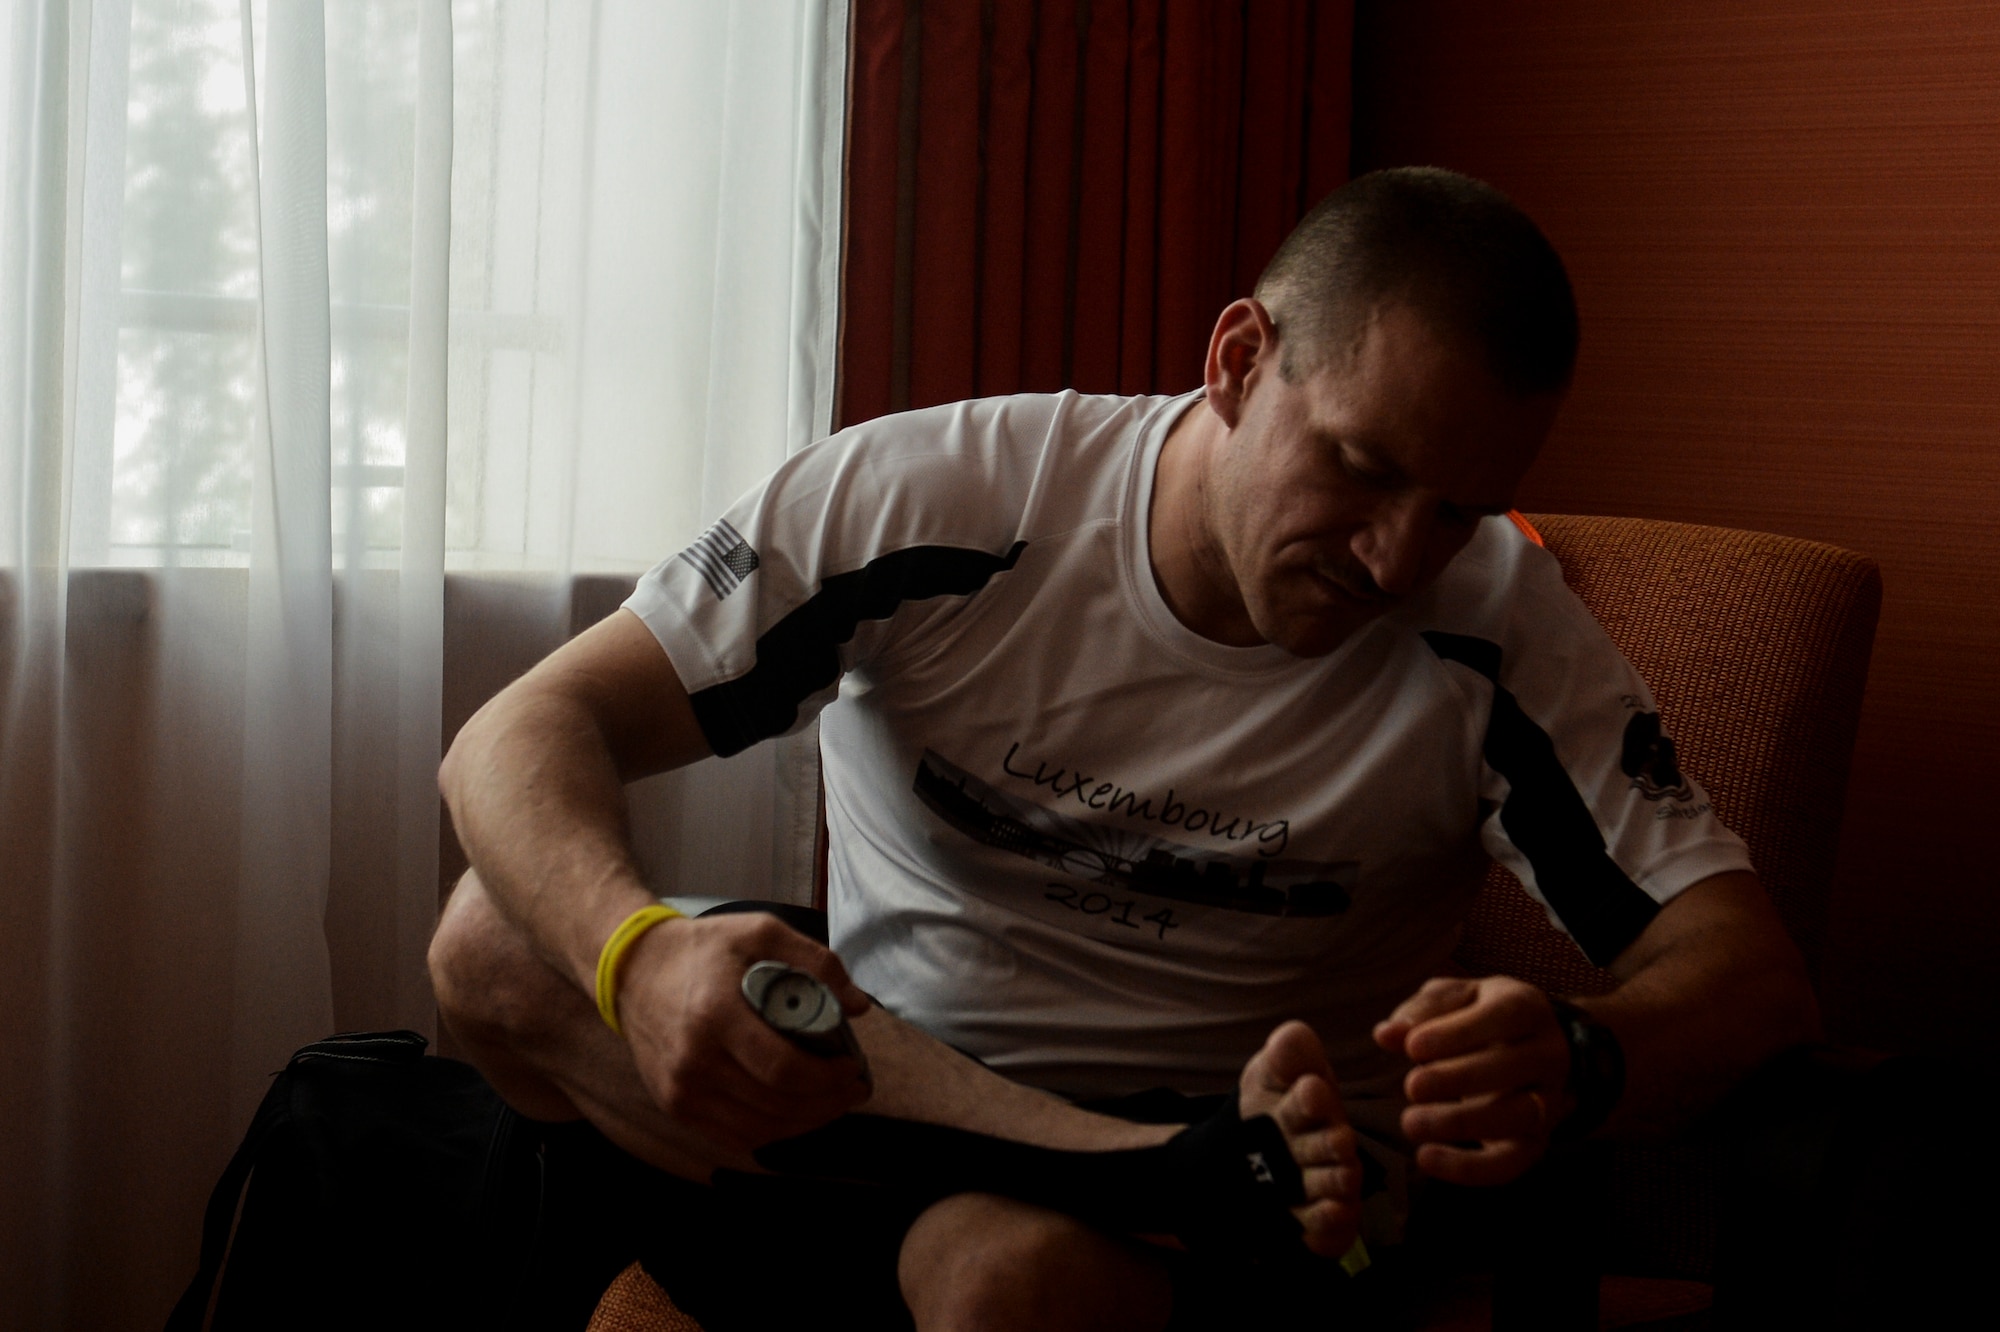 U.S. Air Force Master Sgt. Donald Stichter, 52nd Equipment Maintenance Squadron NCO in charge of munitions inspection from Lakewood, Colo., prepares his feet prior to the start of the ING Luxembourg Night Marathon May 31, 2014, in Luxembourg. Stichter trained for more than five months to get ready for the race. (U.S. Air Force photo by Senior Airman Rusty Frank/Released)